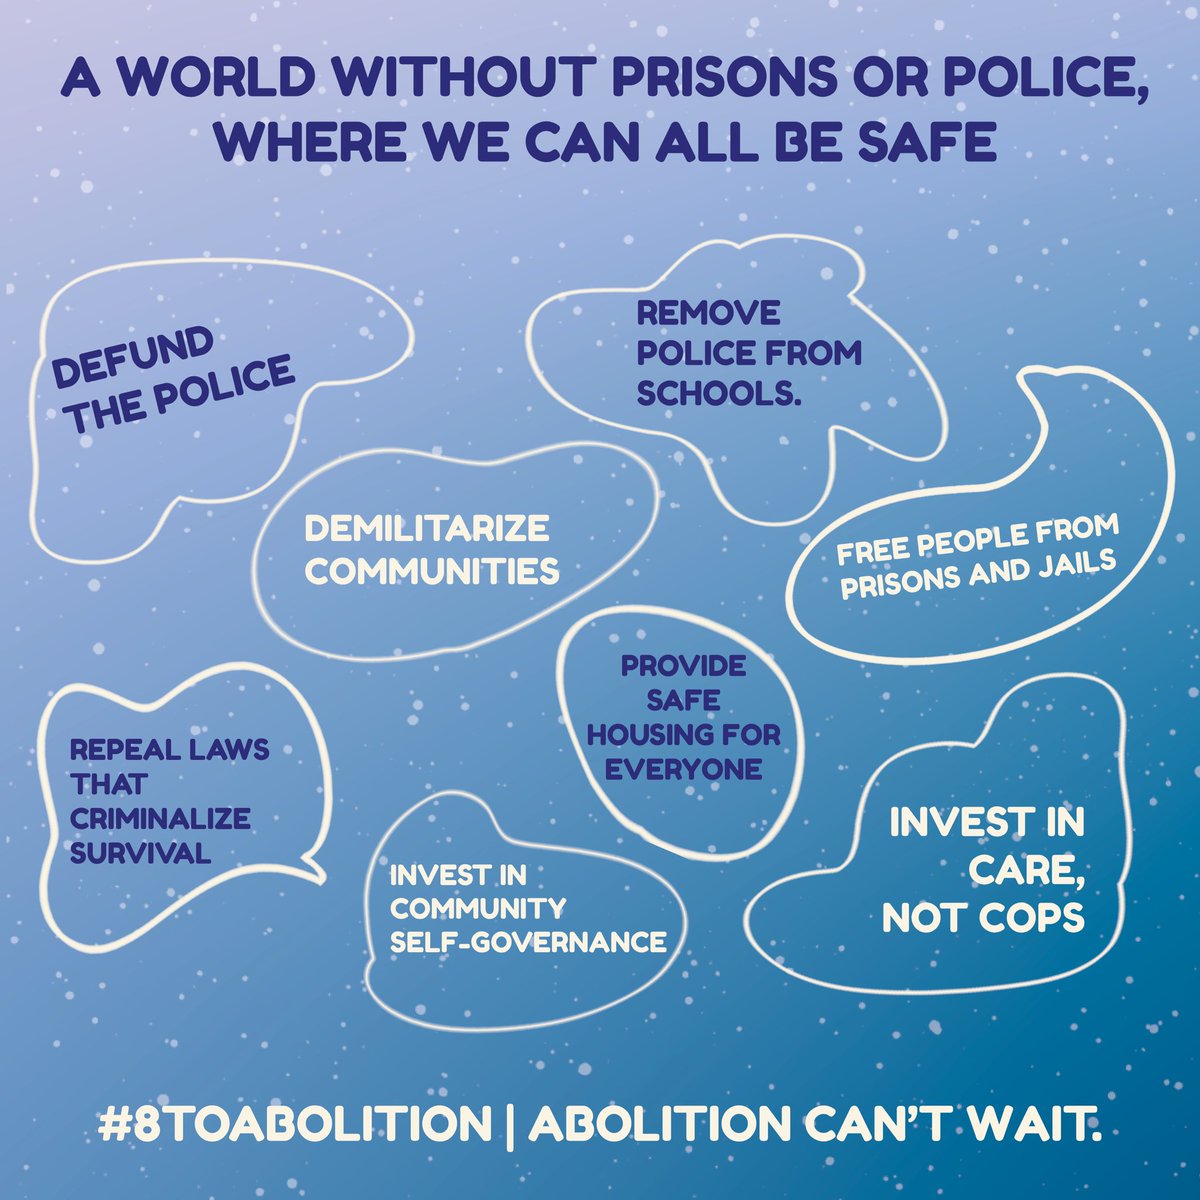 a crucial concept in this justice work is "divest/invest": abolition as a strategy (including the call to  #DefundThePolice) asks us to shift resources from harm-creating structures to liberatory and harm-reducing projects (cf.  #8ToAbolition)